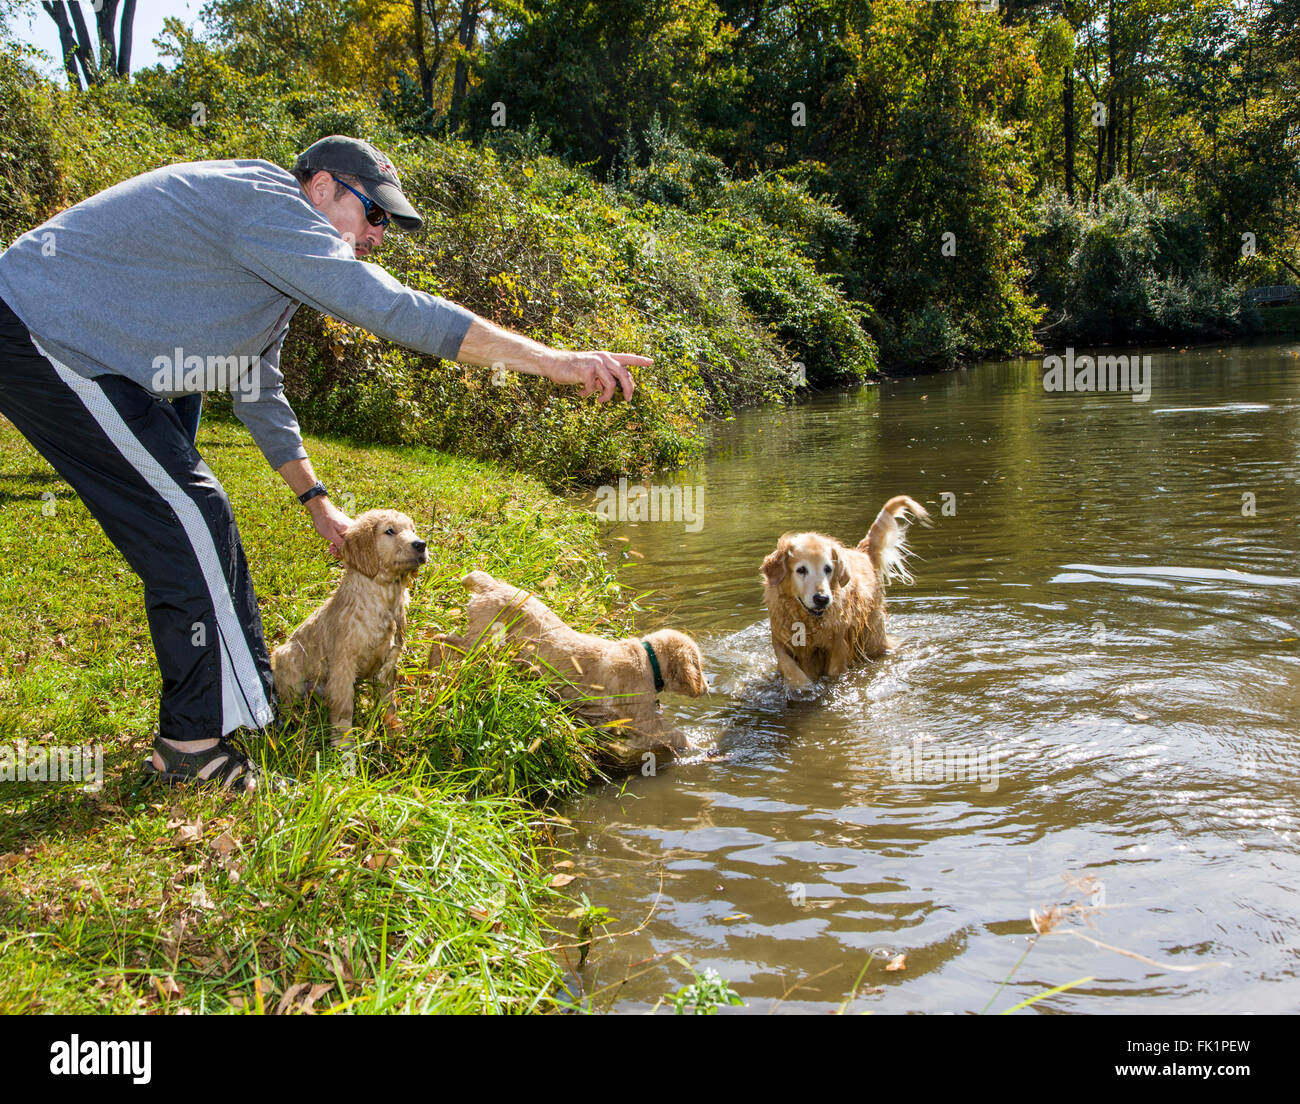 Training twelve week old Golden Retriever puppies to retrieve a bumper from a pond. Stock Photo